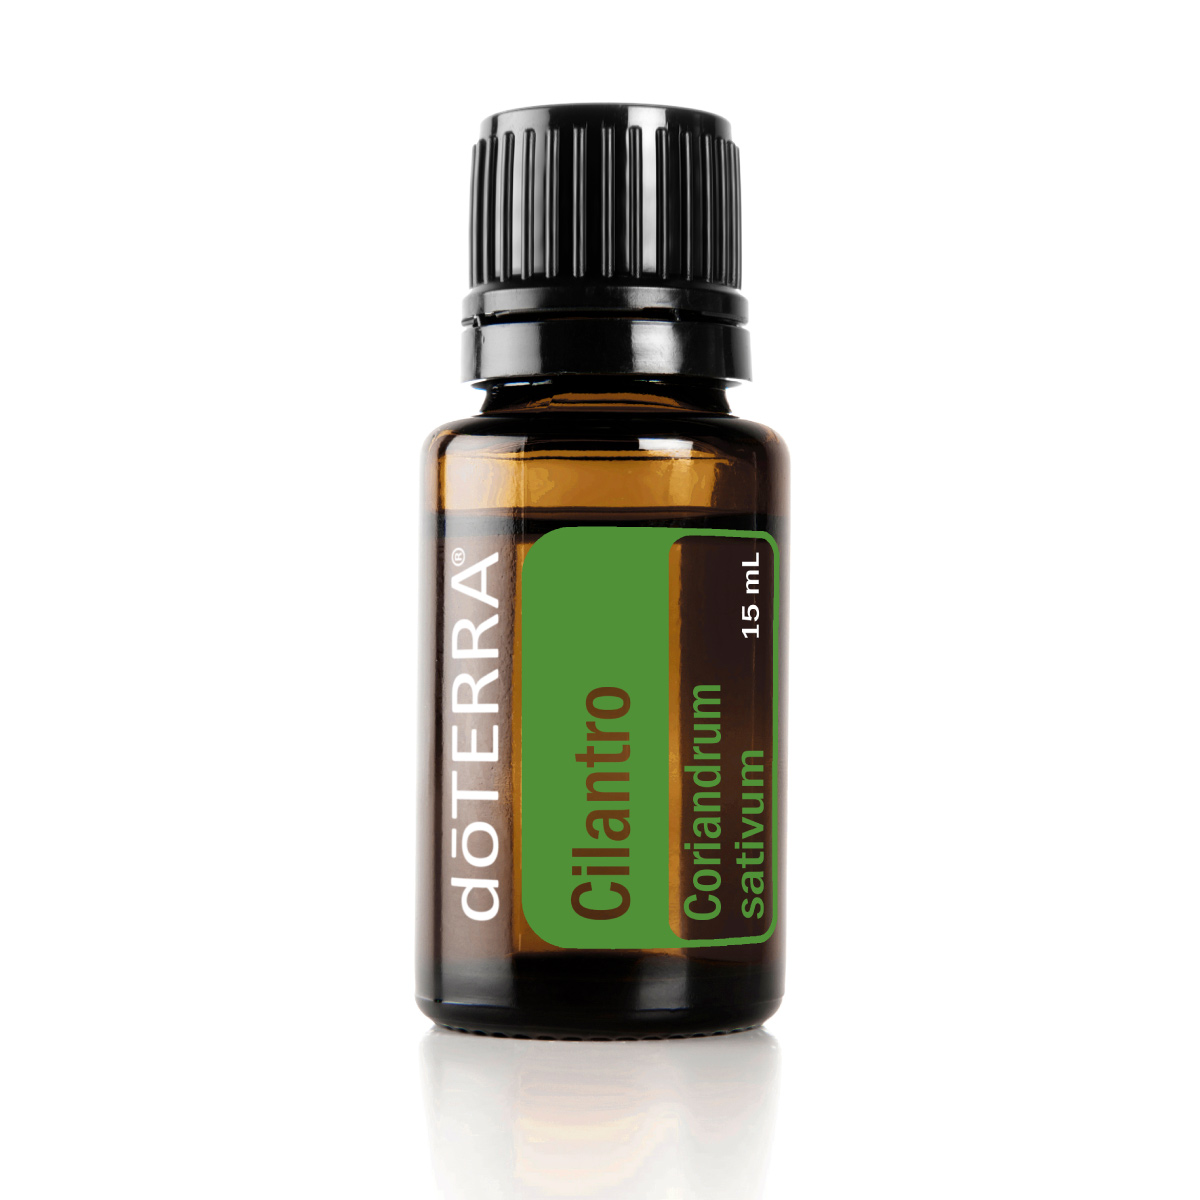 Bottle of Cilantro essential oil. What is Cilantro essential oil used for? Cilantro oil can be used for cooking, and to support the nervous system, digestive system, or immune system.*